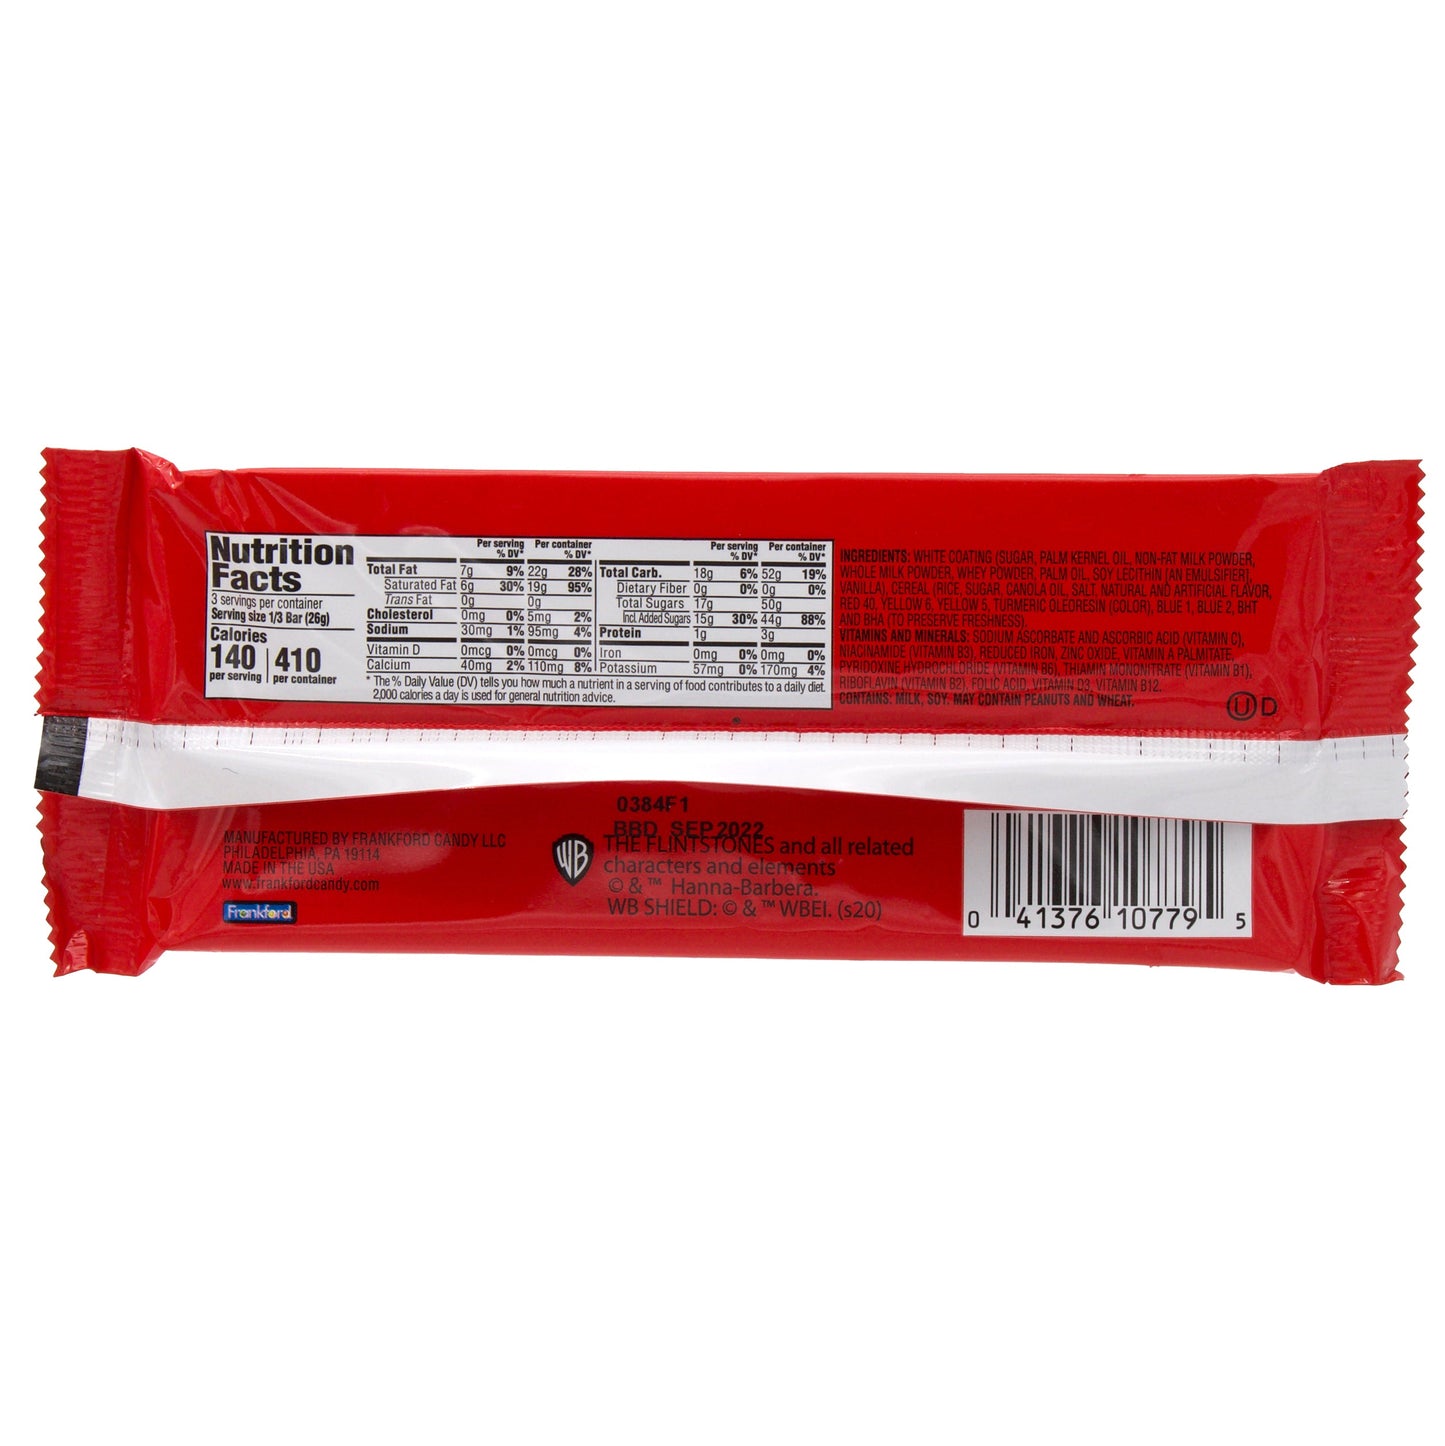 back of red candy bar wrapper with nutrition facts and ingredients